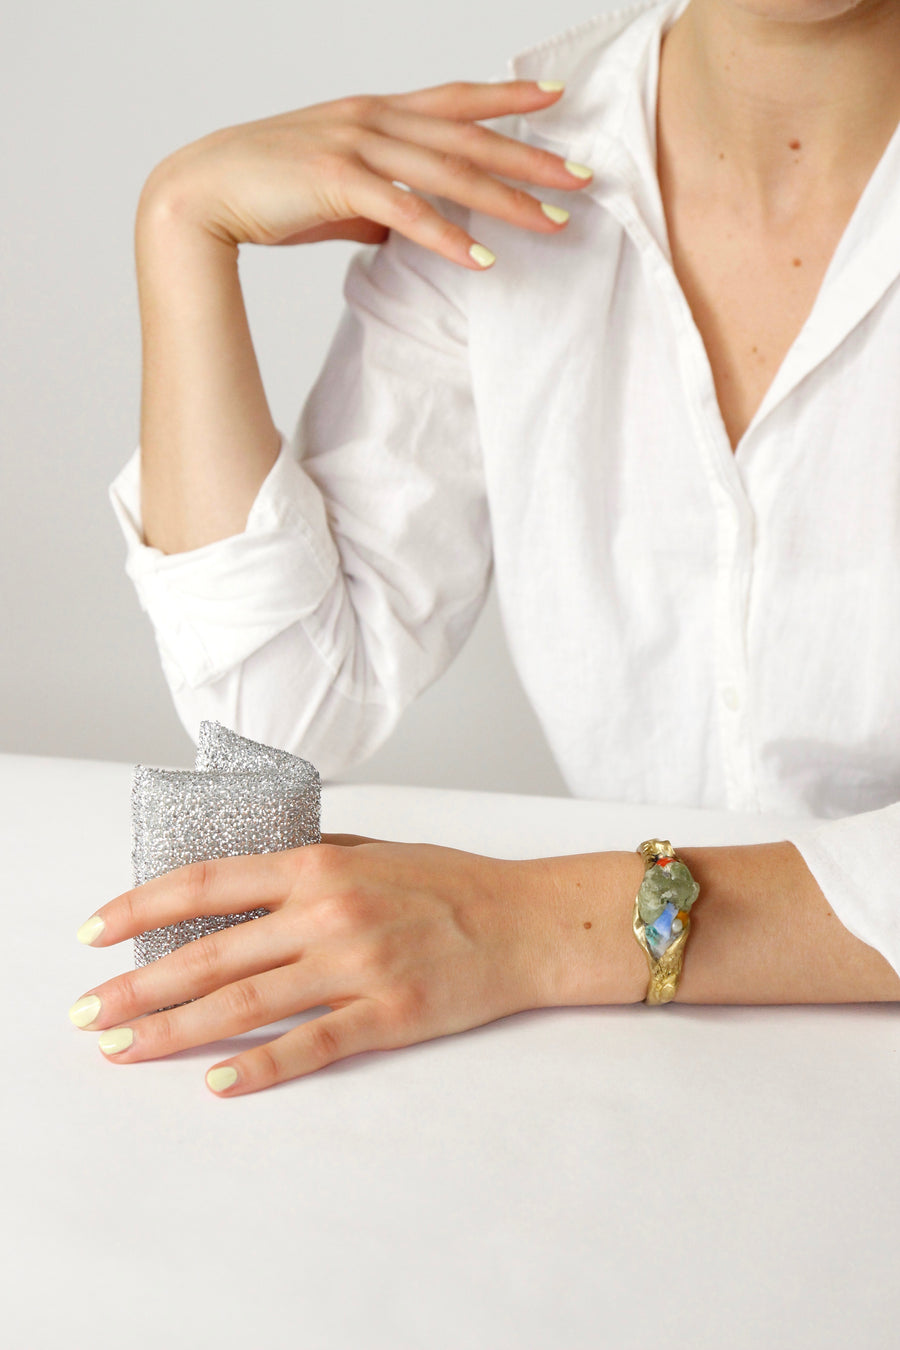 Handcrafted One-of-a-kind Cuff Bracelet in Brass by Gré with Prehnite and Turquoise